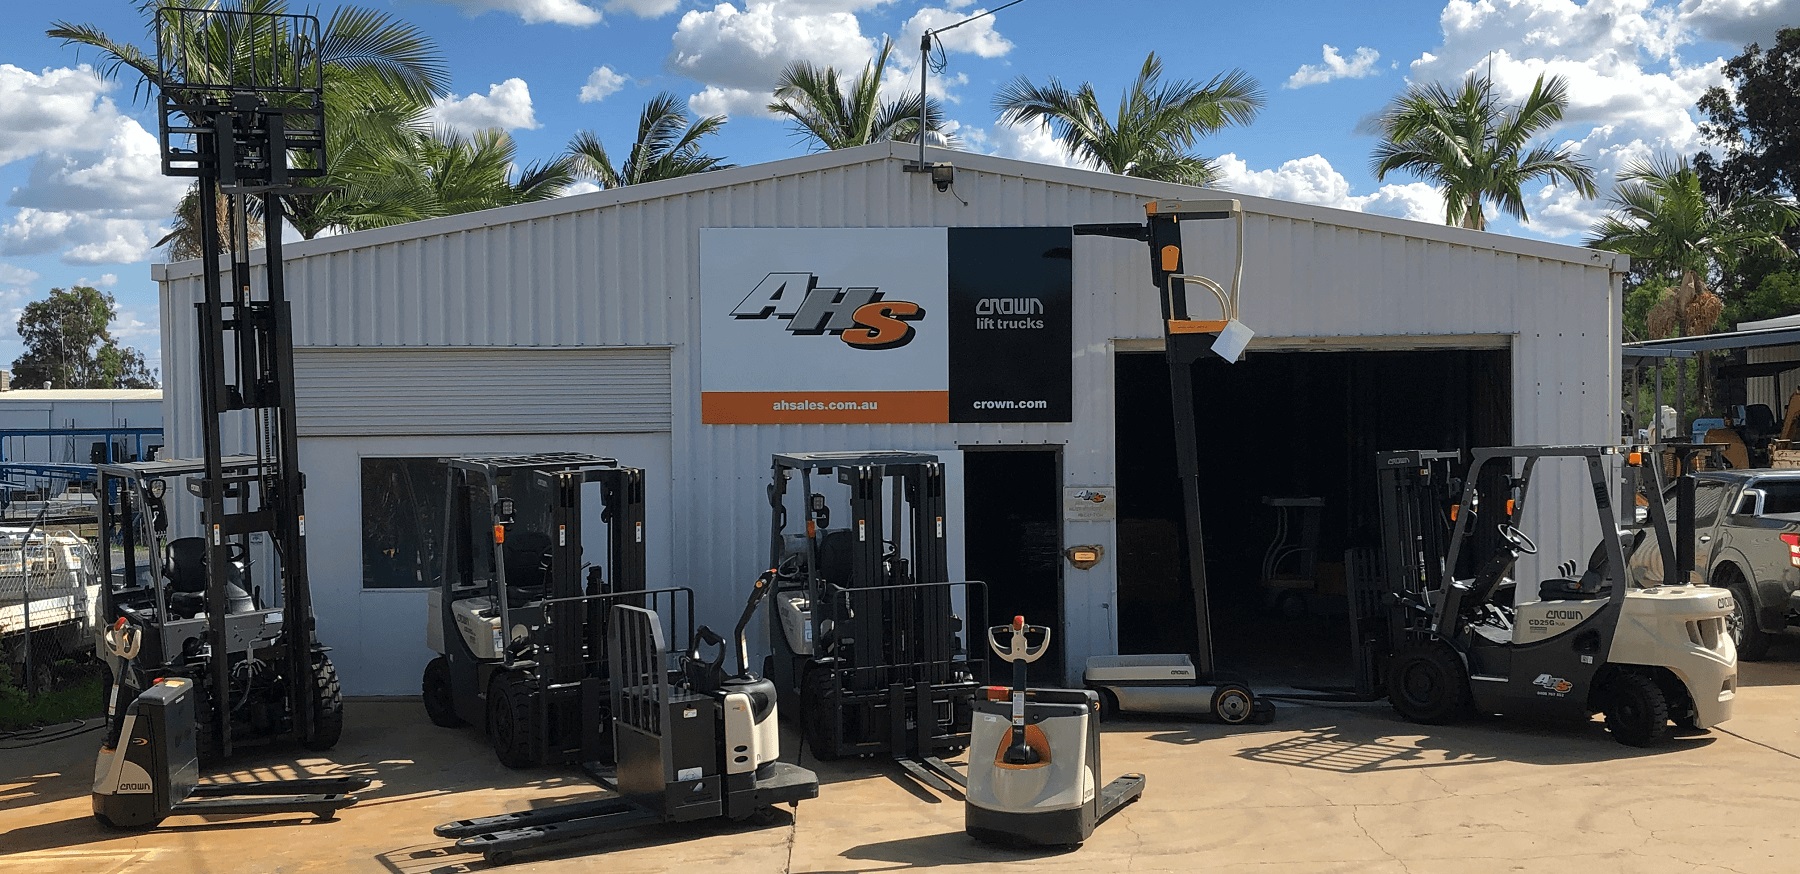 Welcome to Rockhampton Forklifts - AHS